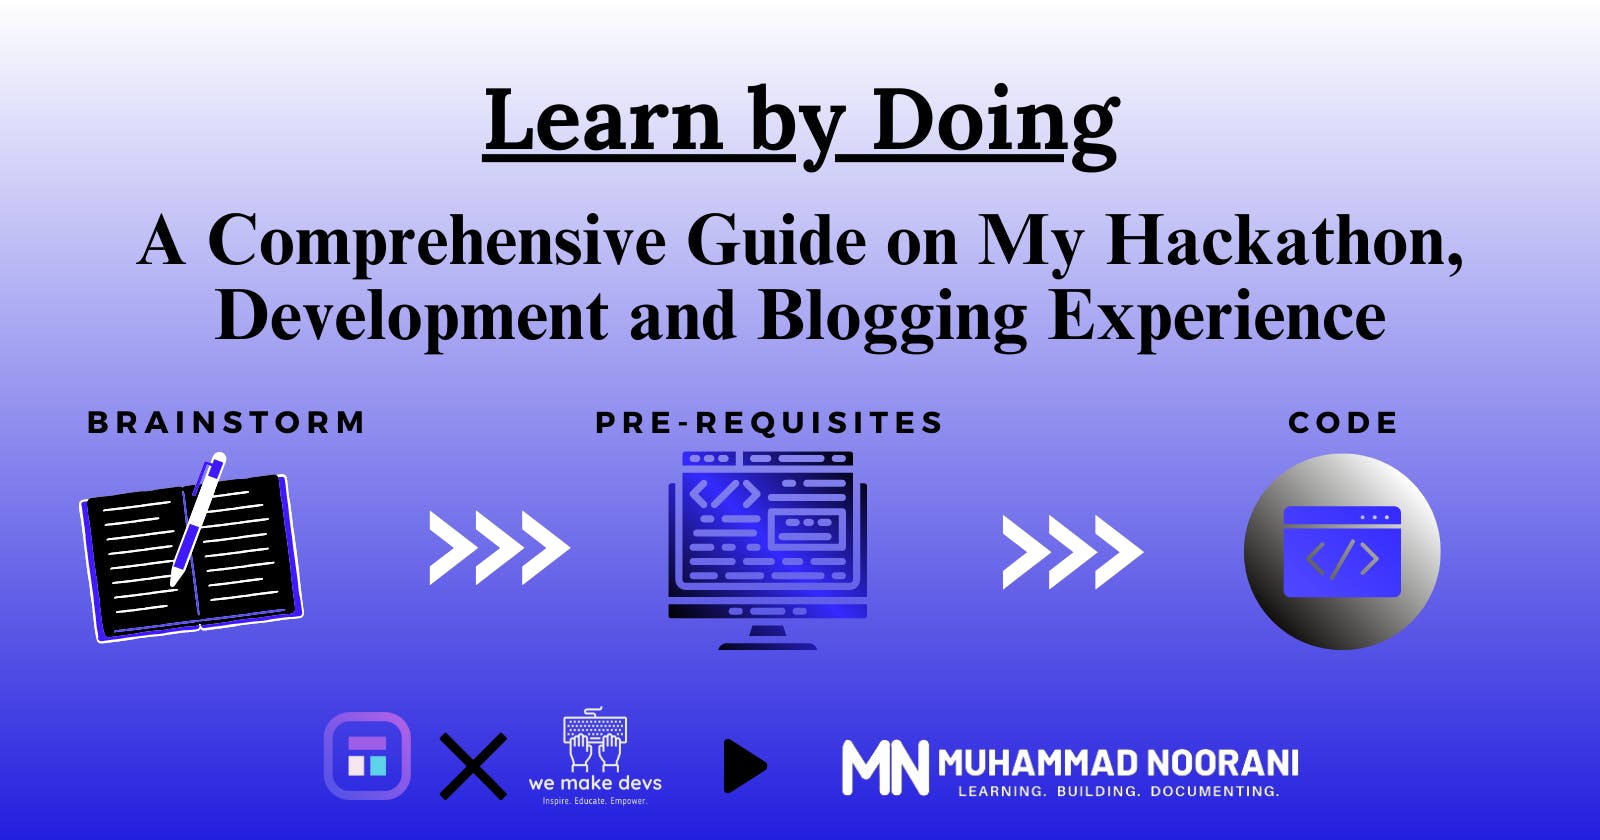 Learn by Doing: A Comprehensive Guide on My Hackathon and Blogging Experience